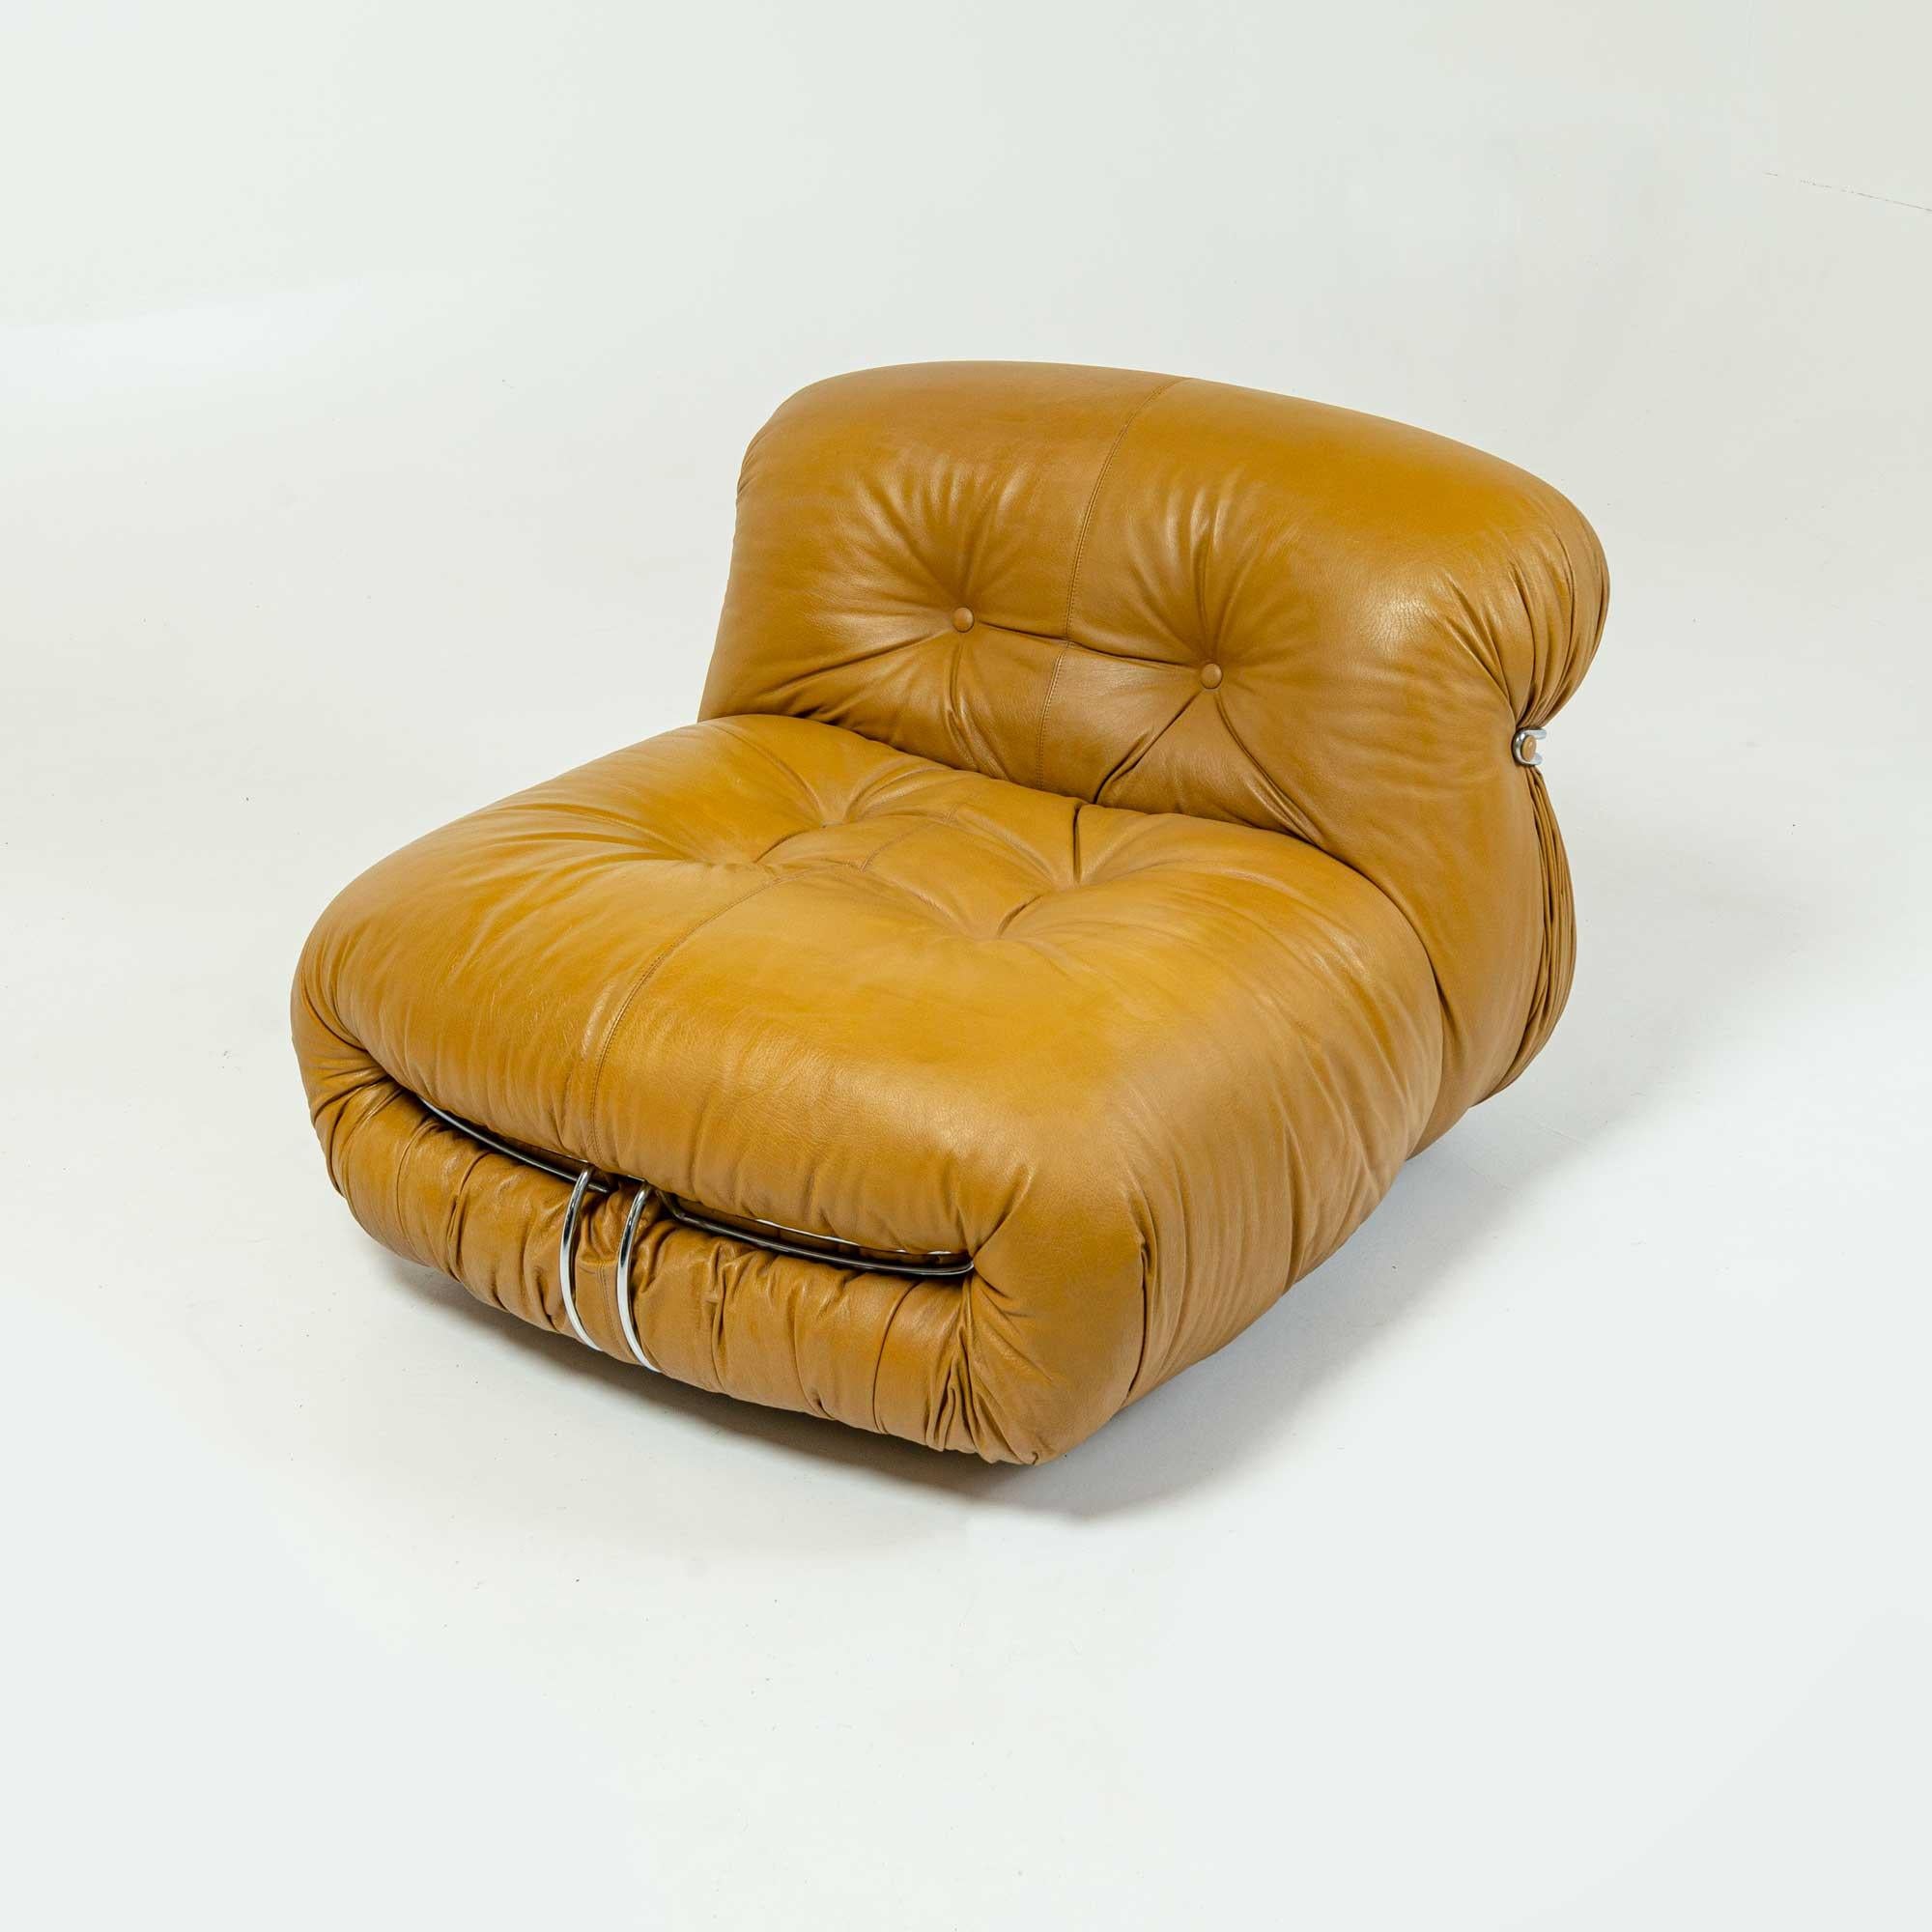 This is a rare Soriana Armchair in original light cognac leather, designed by Afra and Tobia Scarpa and manufactured by Cassina in 1970s. For its age, this chair is in absolutely wonderful condition. The leather is soft and subtle, with very little